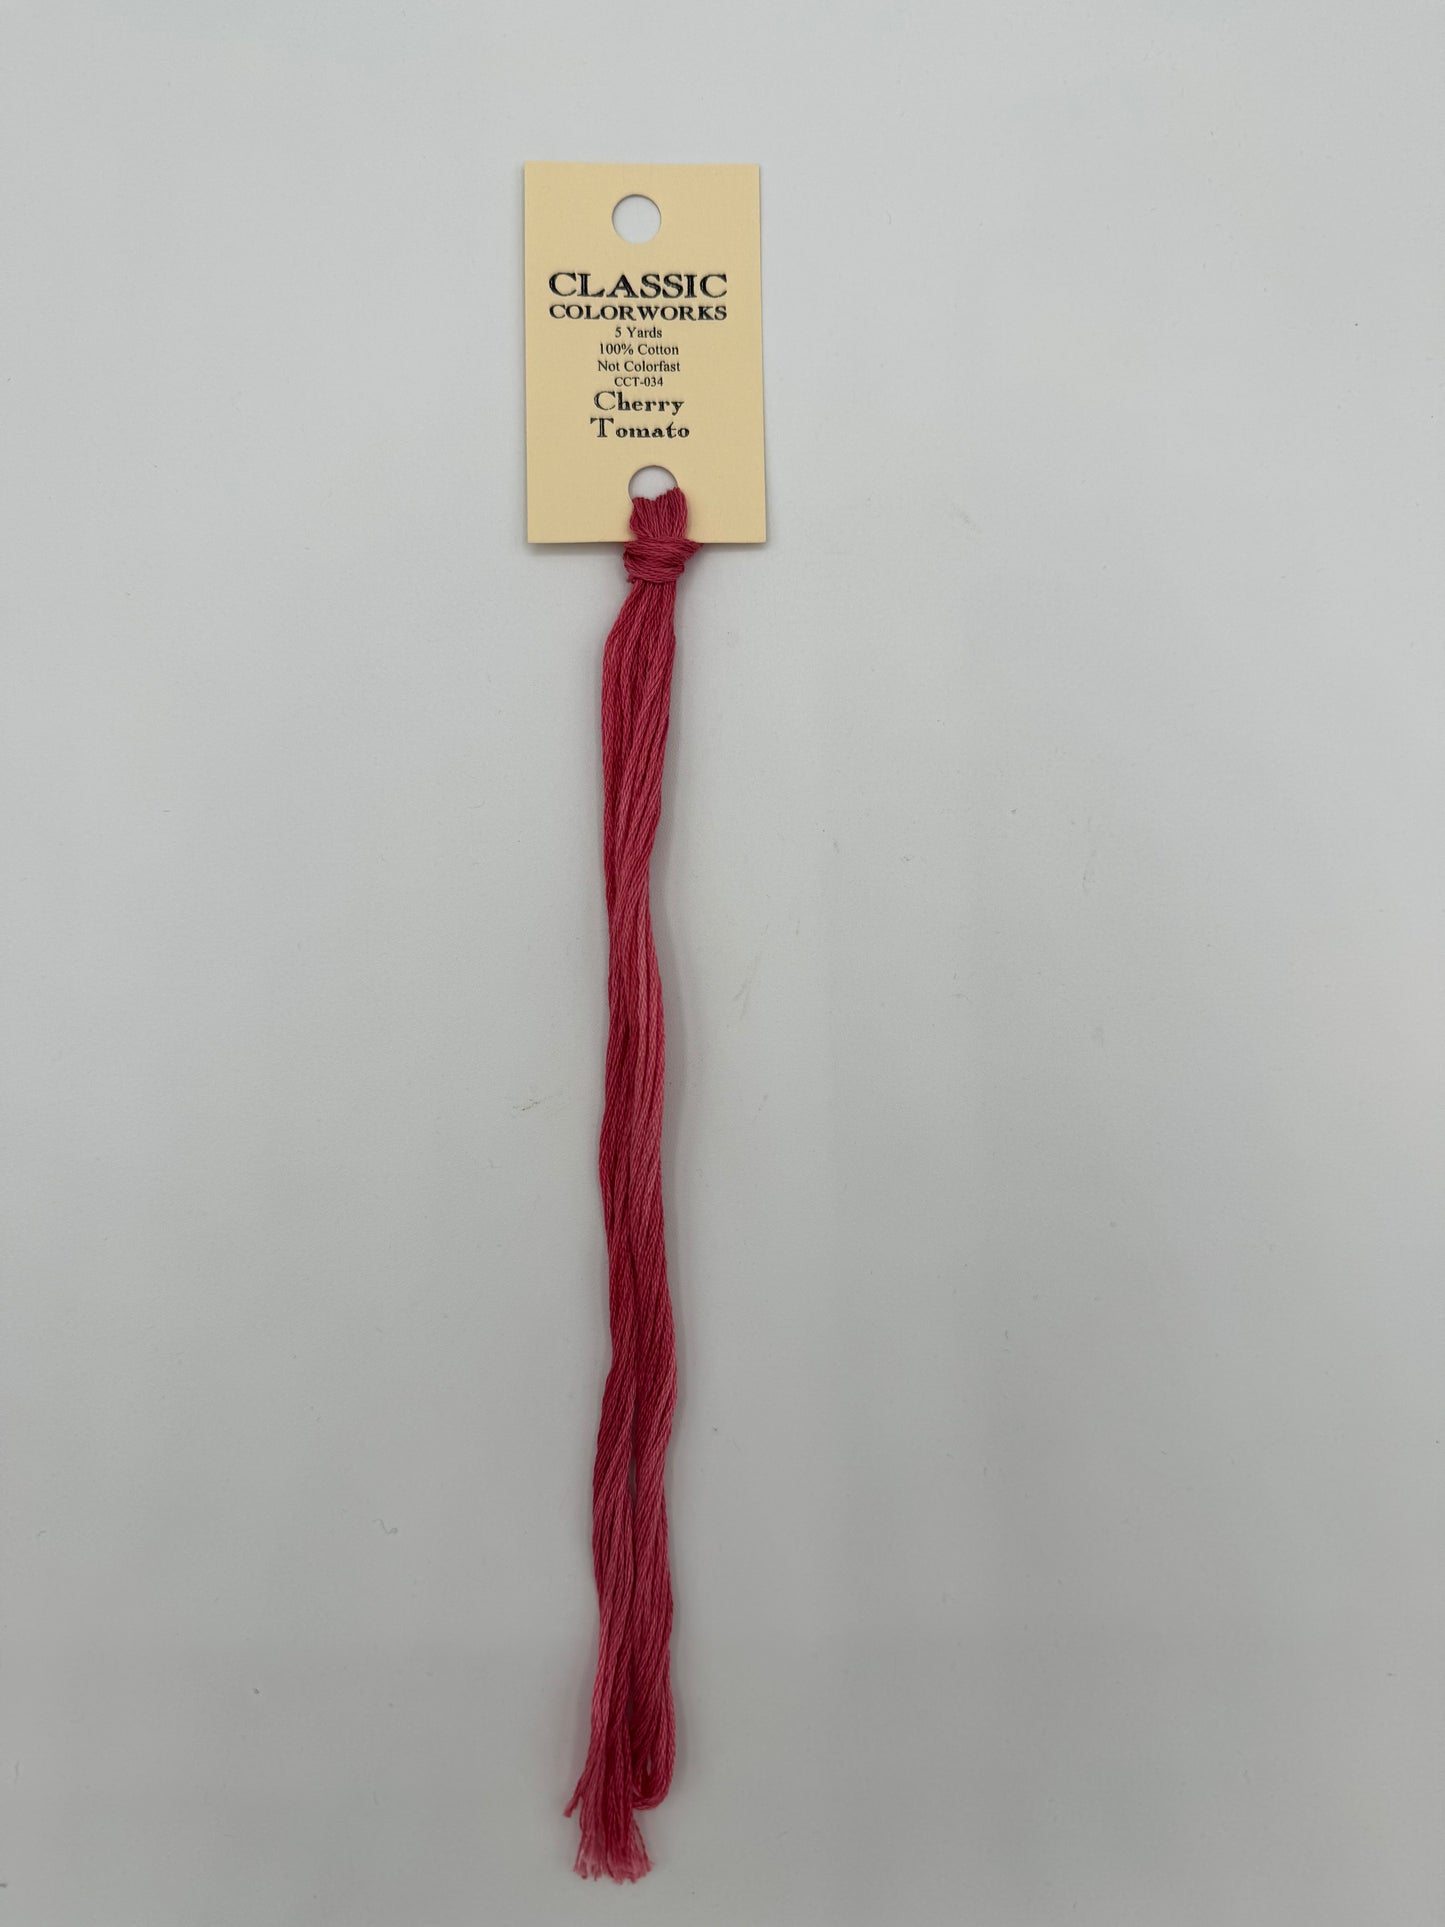 Cherry Tomato - Classic Colorworks Cotton Floss